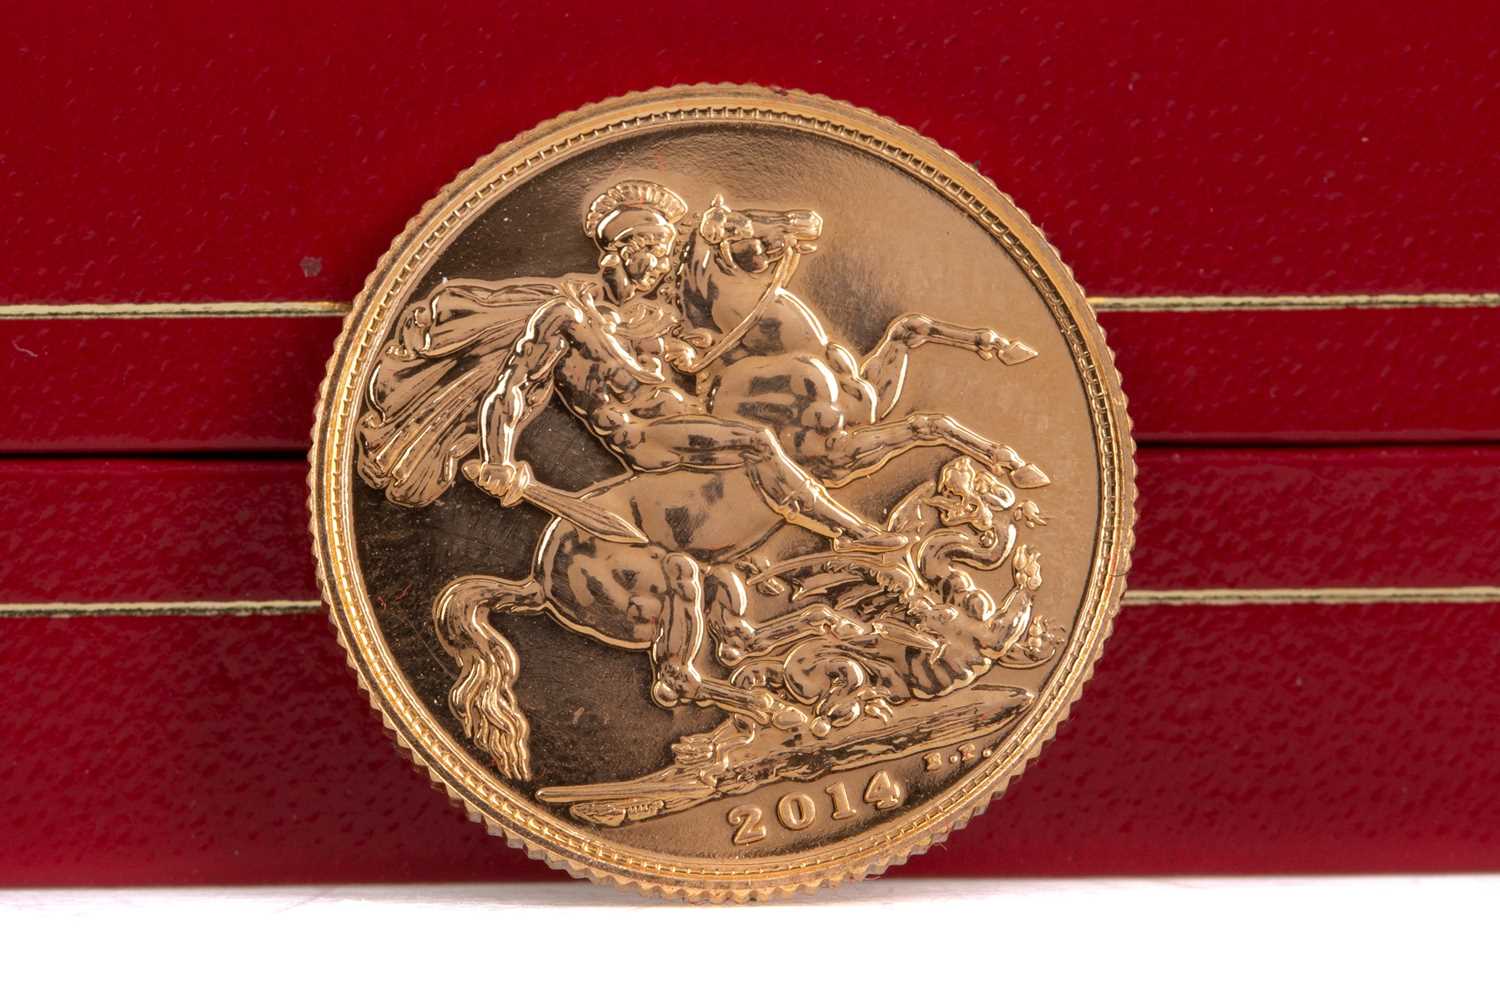 Lot 14 - AN ELIZABETH II GOLD SOVEREIGN DATED 2014